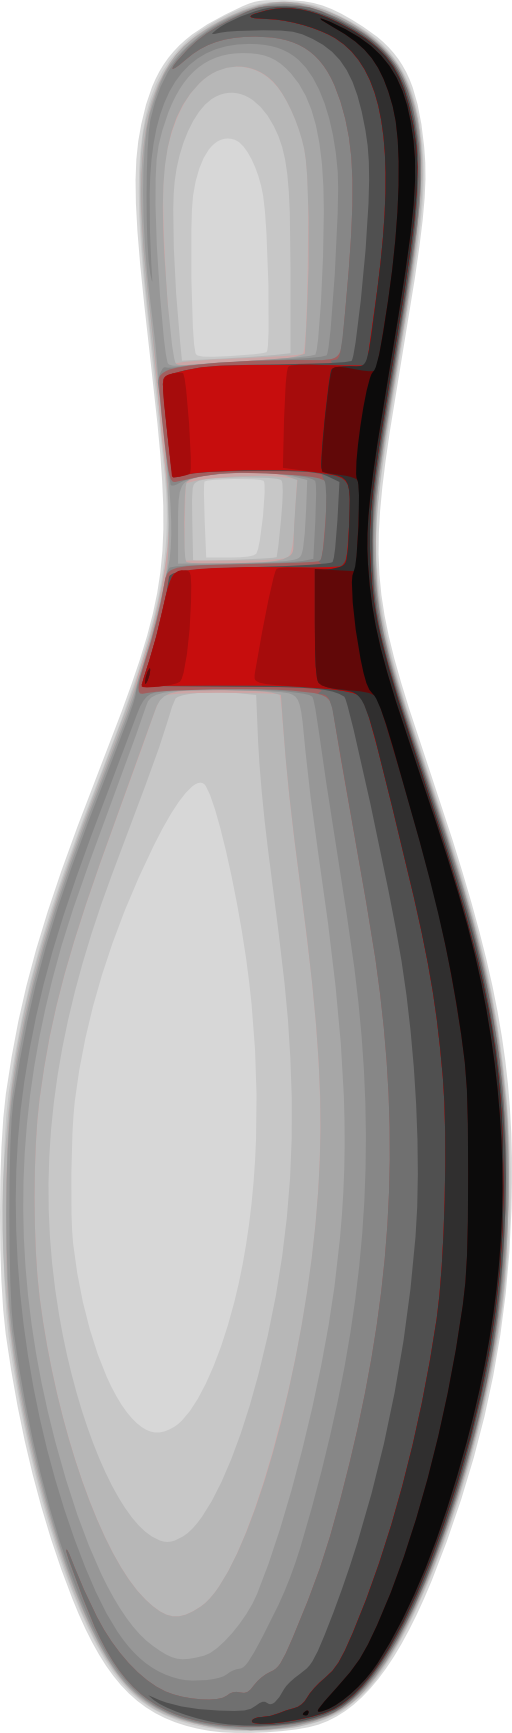 Bowling Pin Clipart Royalty Free Public Domain Clipart